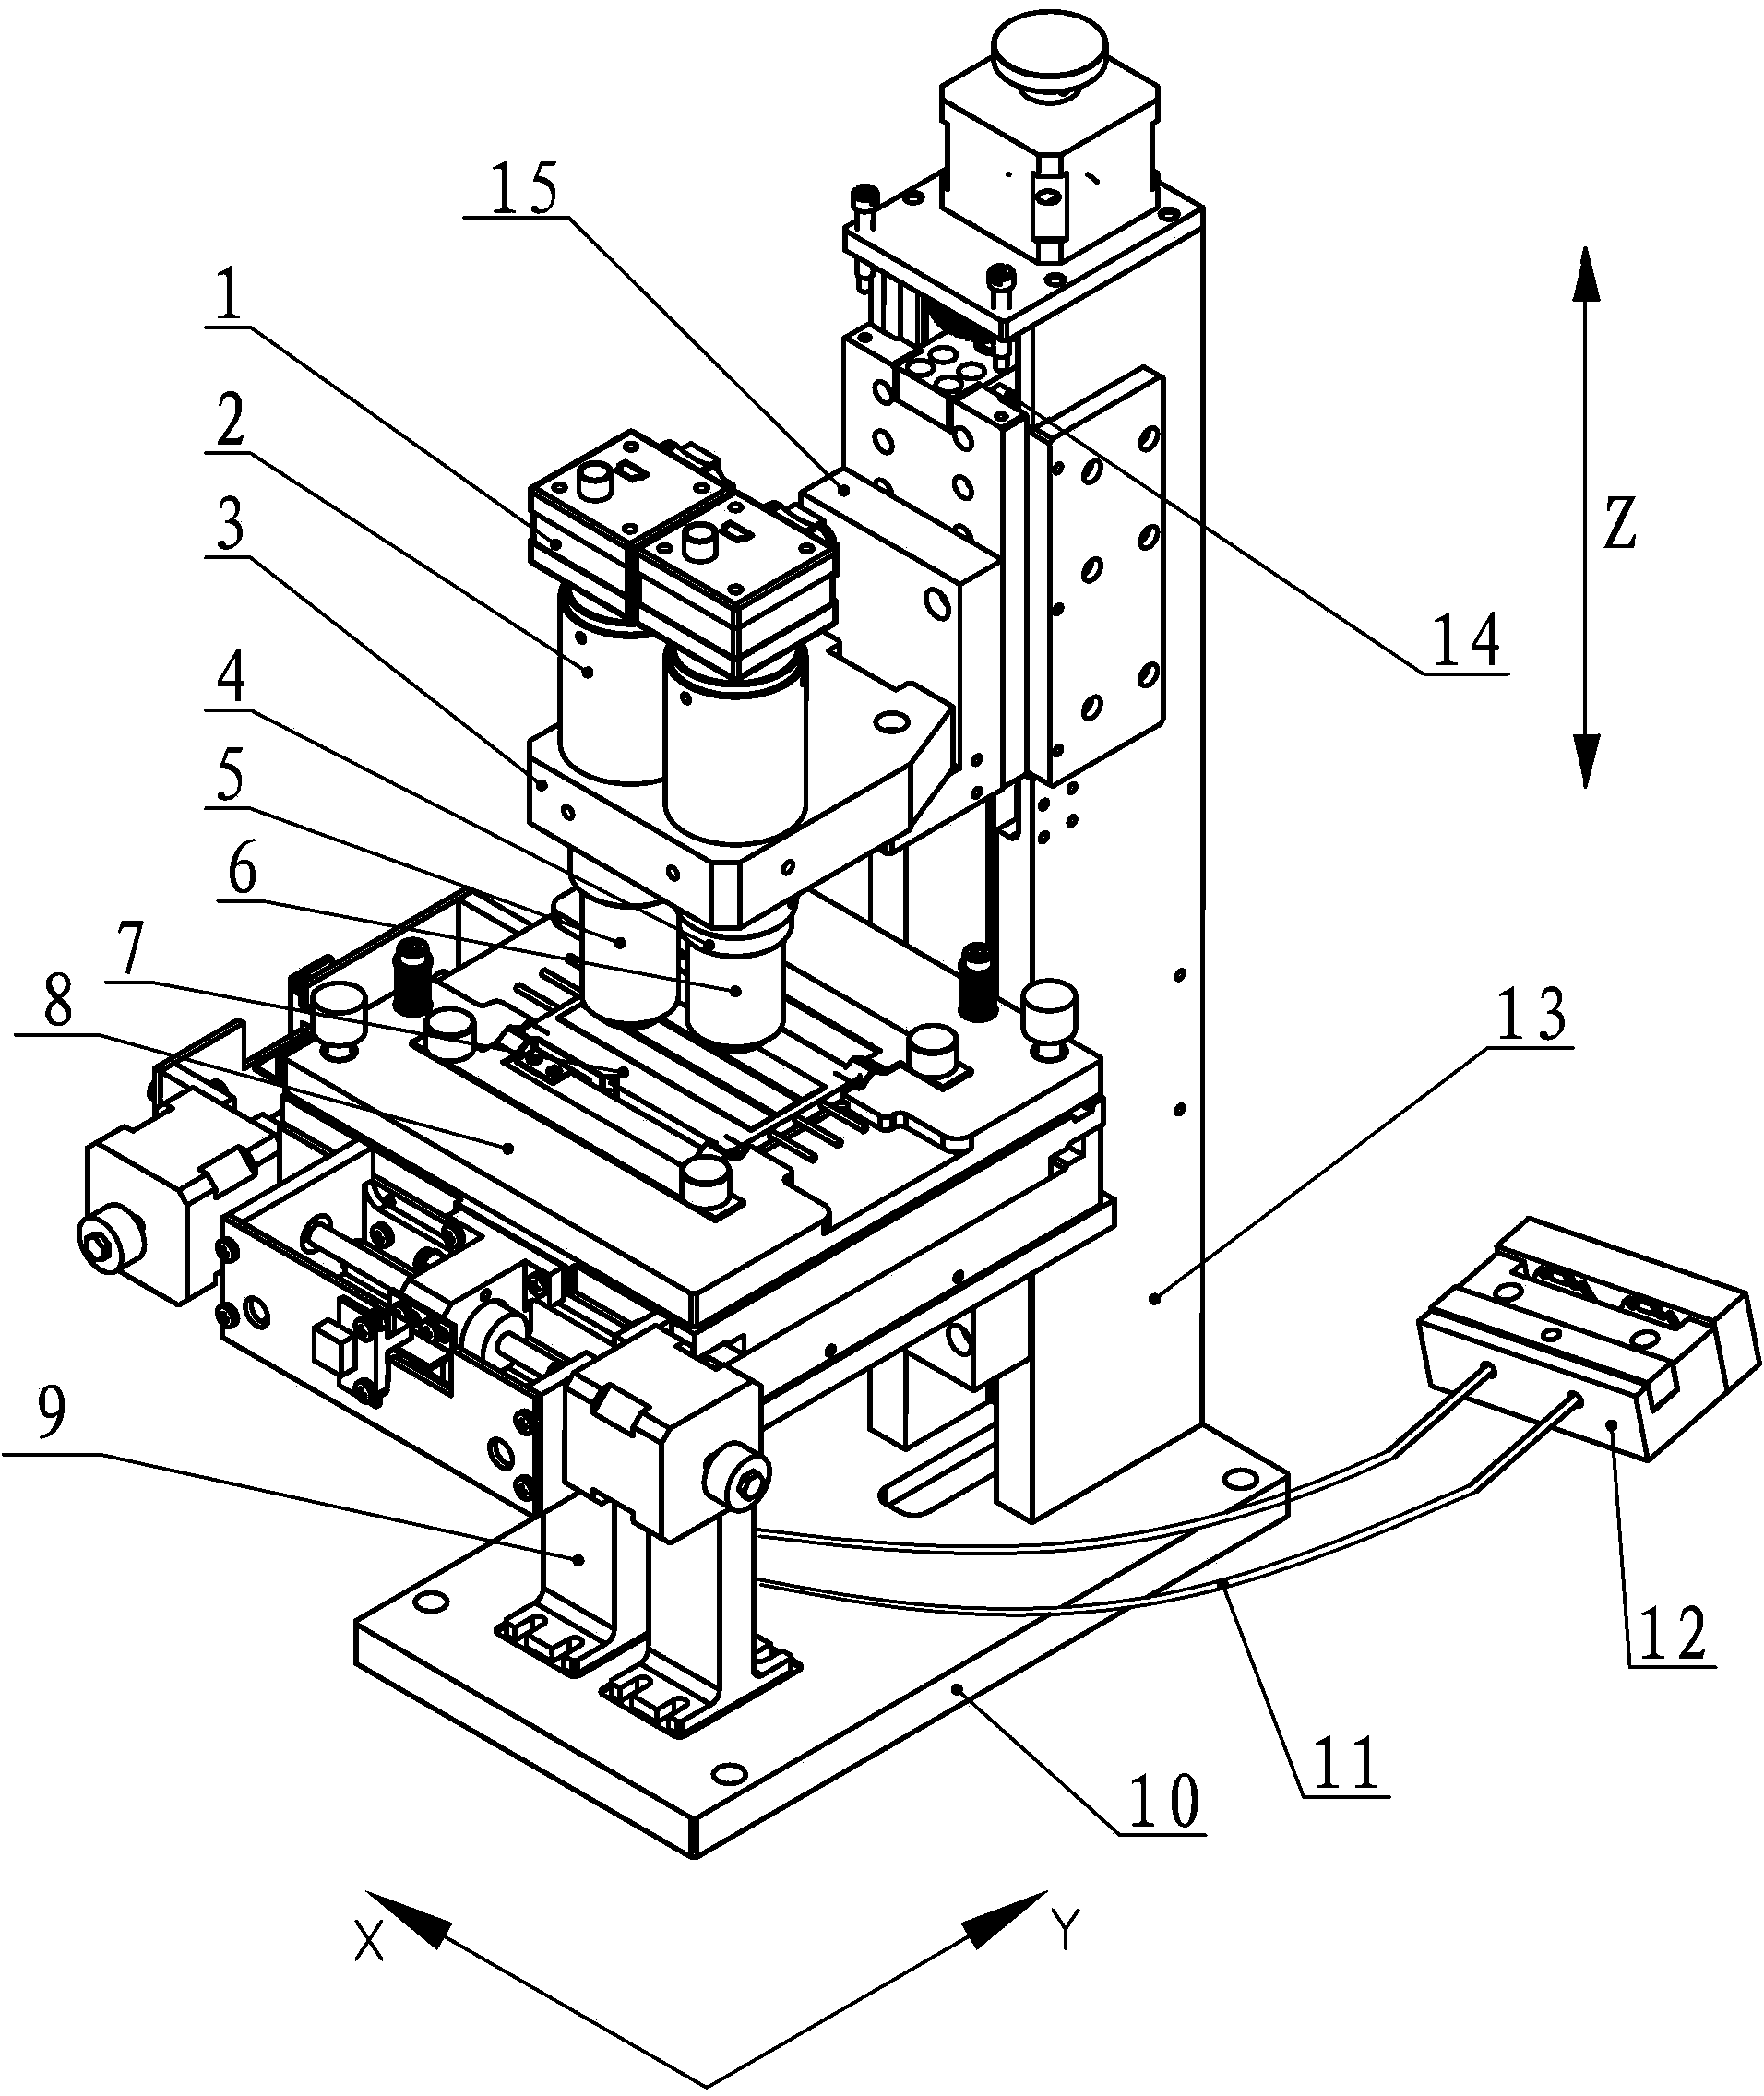 Double-lens-cone microscope device used in urinary sediment inspection equipment